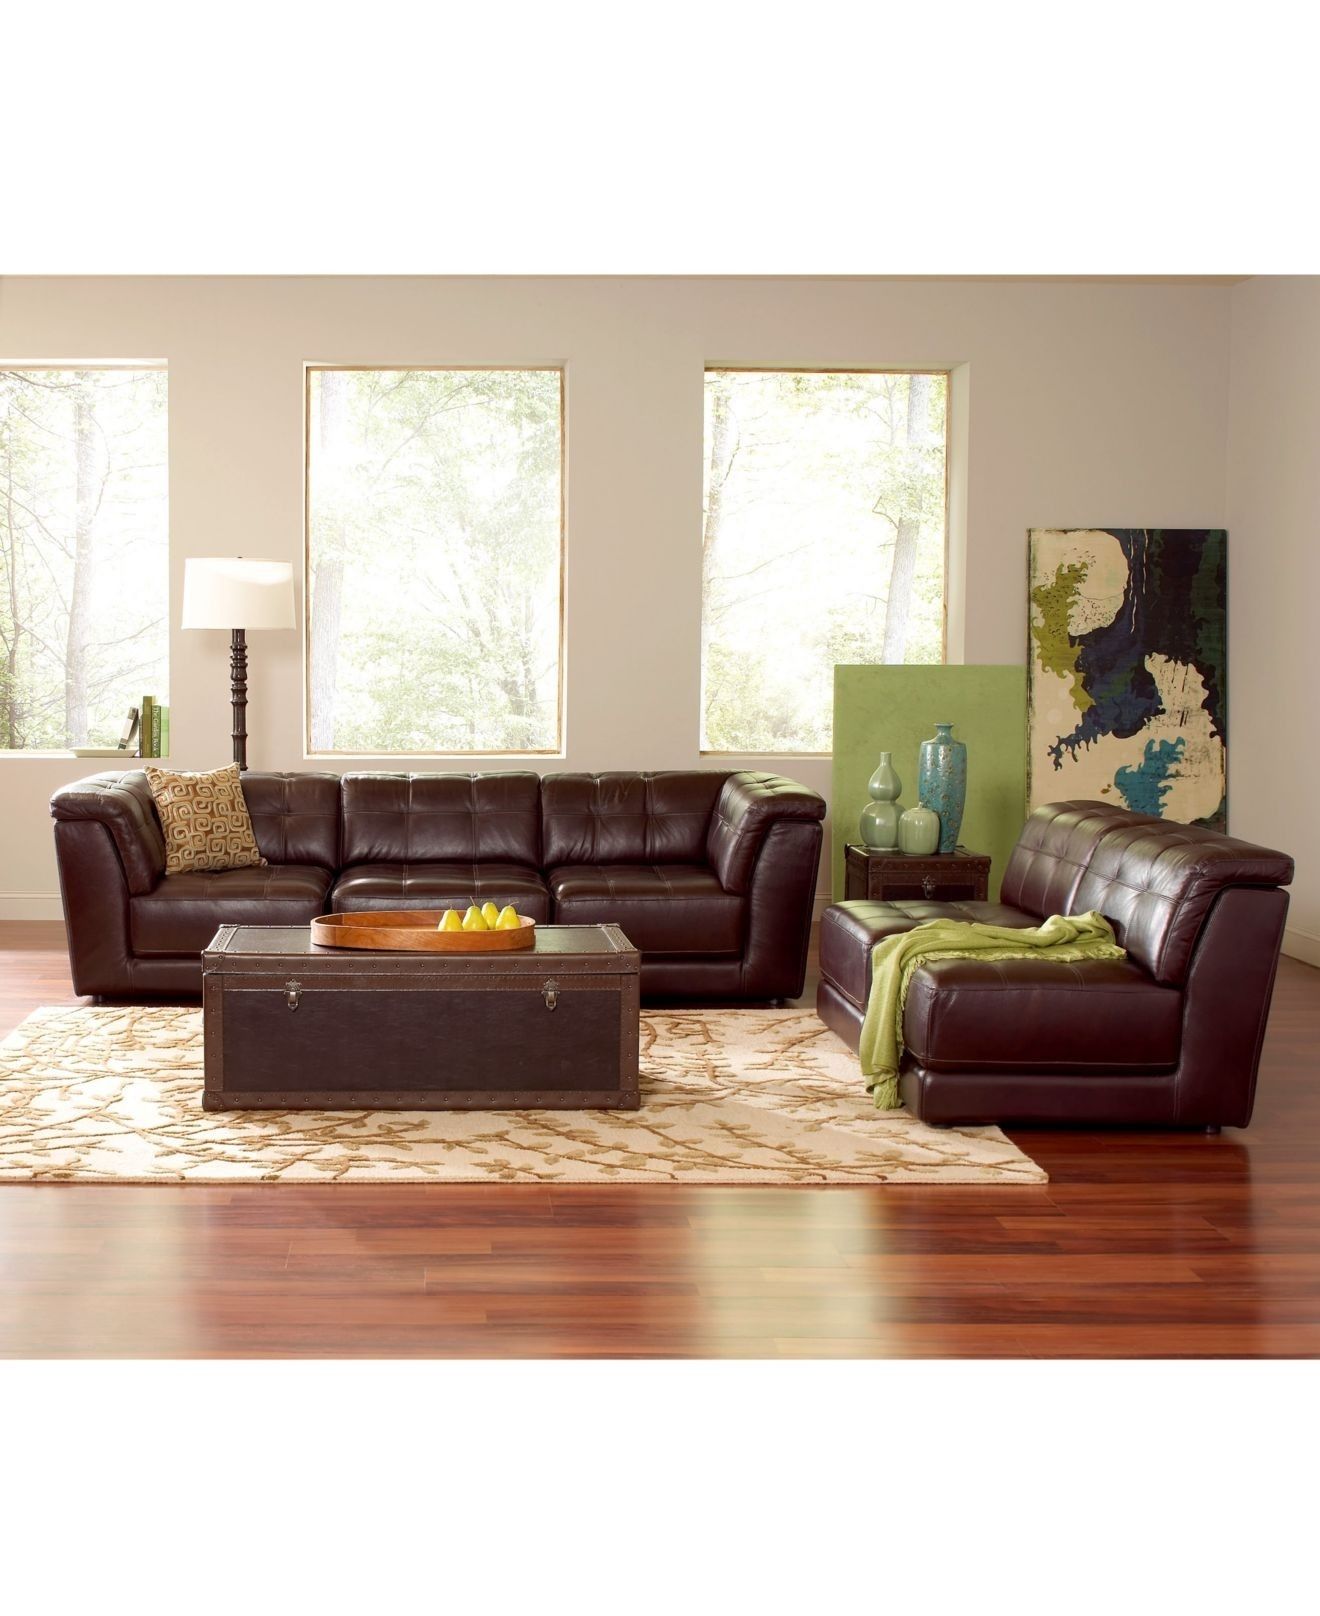 New Sectional Sofa Tampa – Buildsimplehome Within Tampa Sectional Sofas (View 6 of 10)